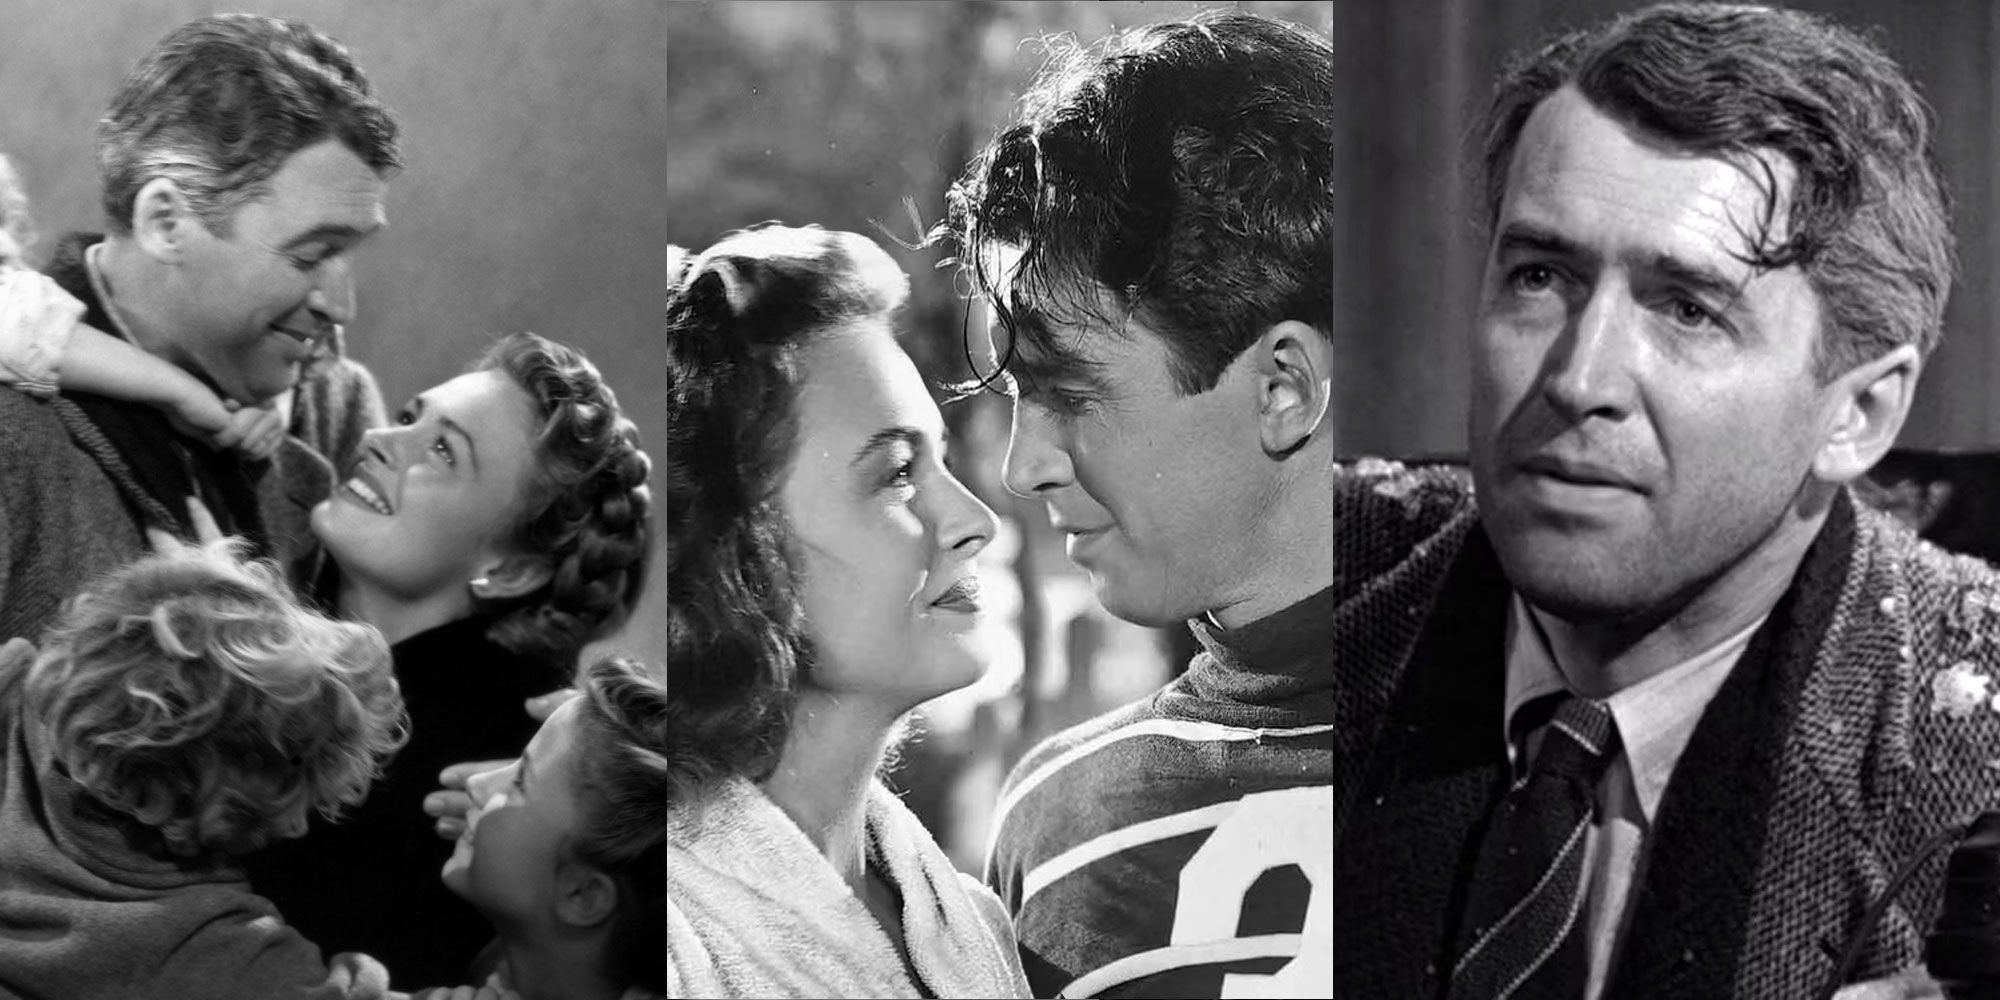 How Old Are The Cast In It’s A Wonderful Life